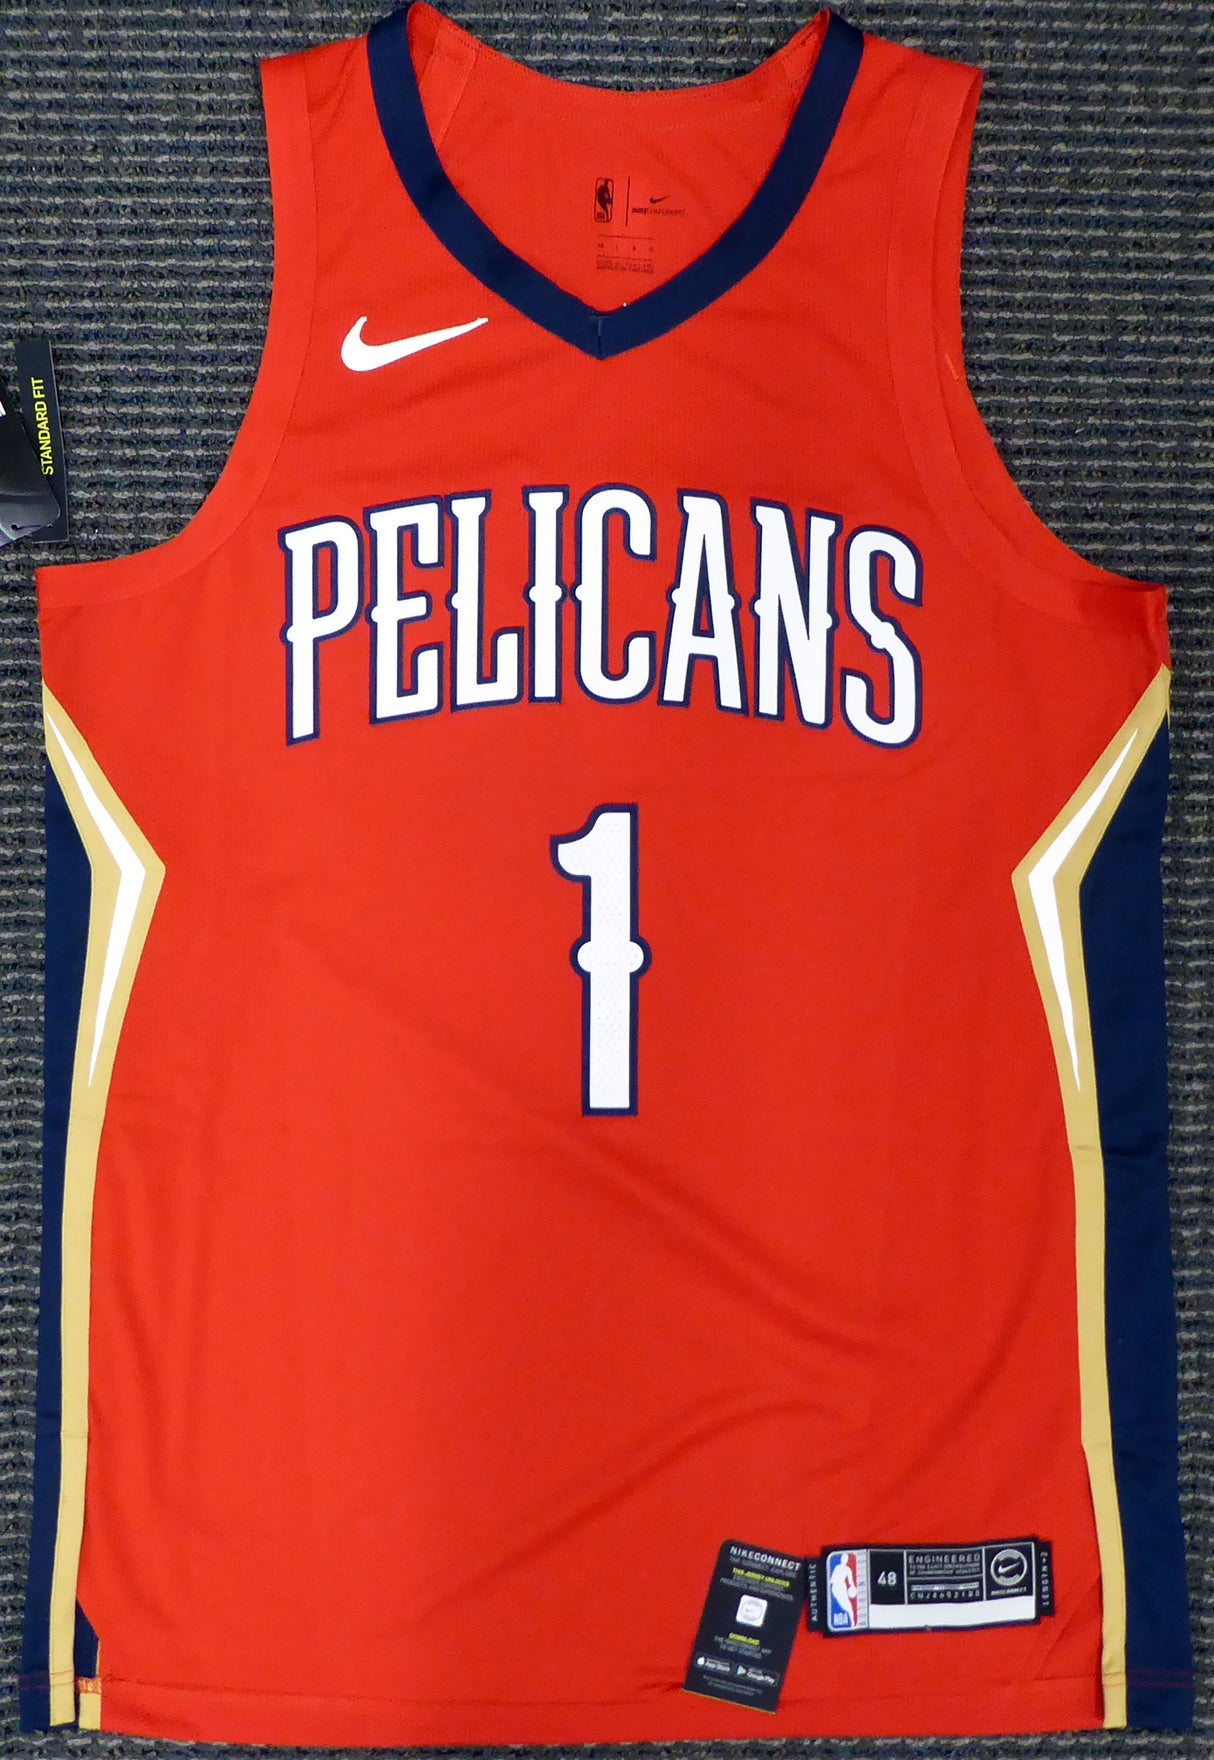 New Orleans Pelicans Zion Williamson Autographed Authentic Red Nike Jersey Size 48 Fanatics Holo Stock #185353